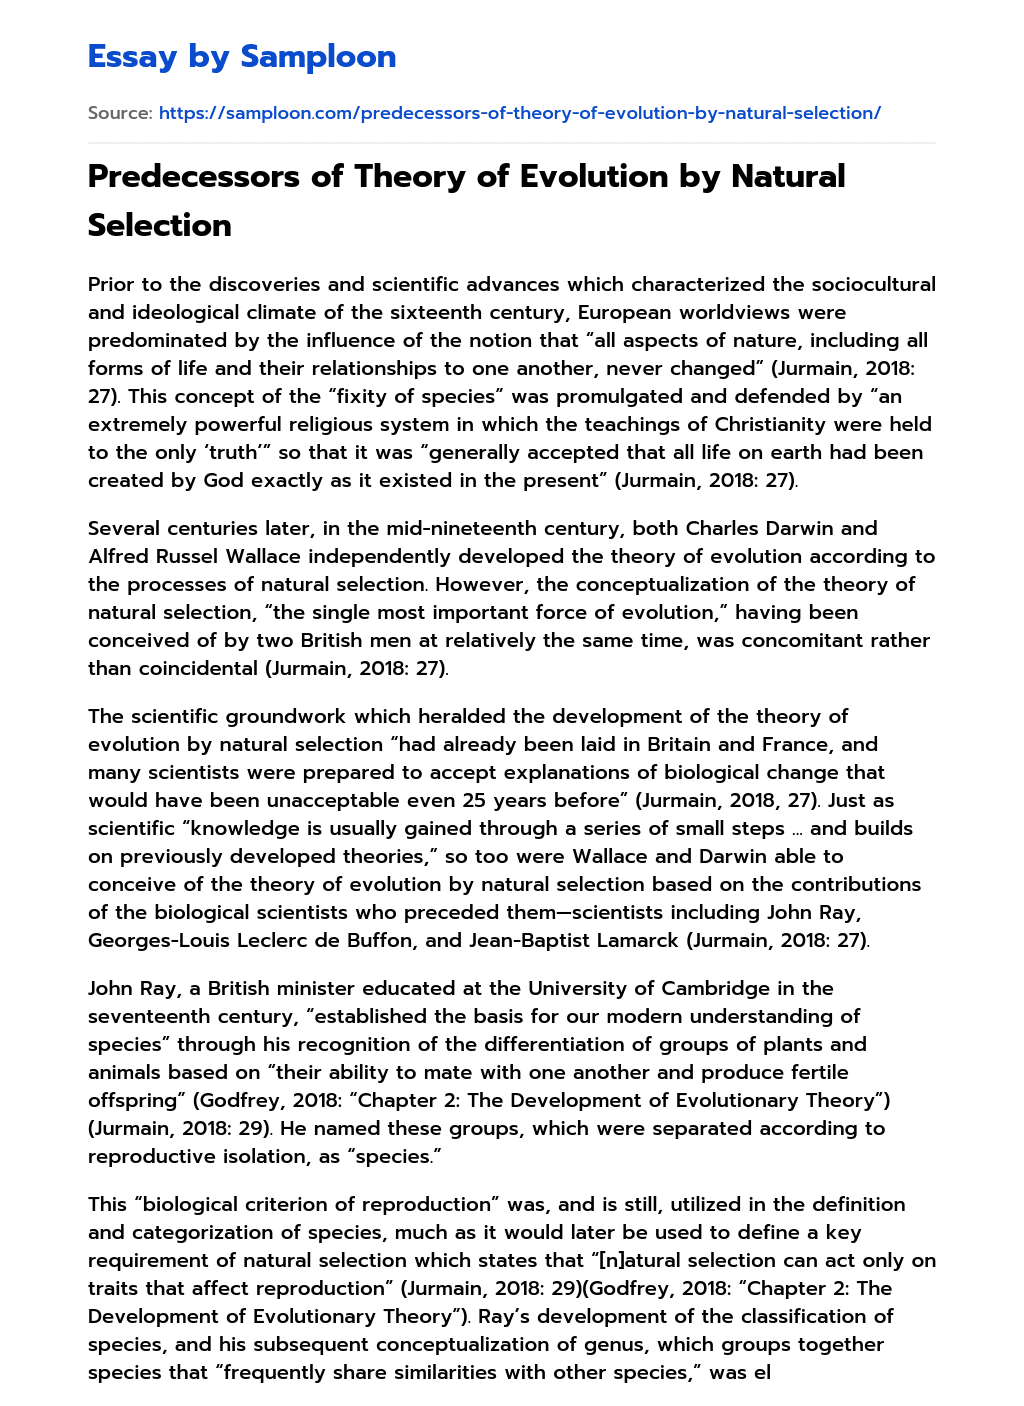 Predecessors of Theory of Evolution by Natural Selection essay